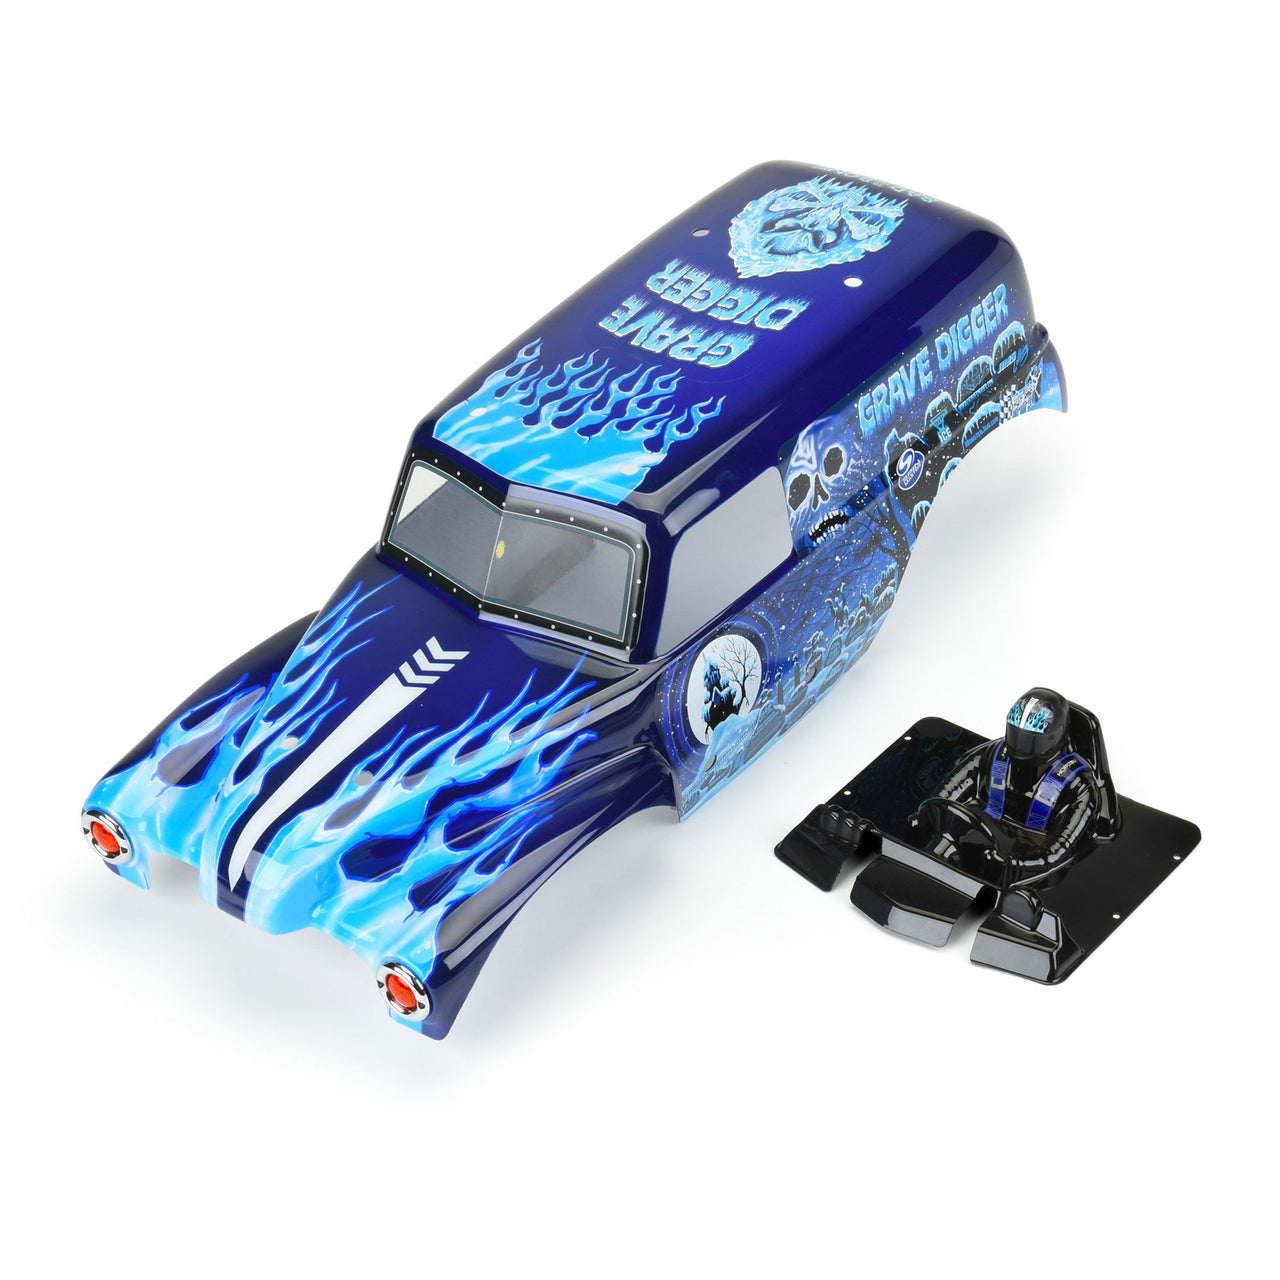 PRO359313 1/10 Grave Digger Ice (Blue) Painted Body Set: LMT